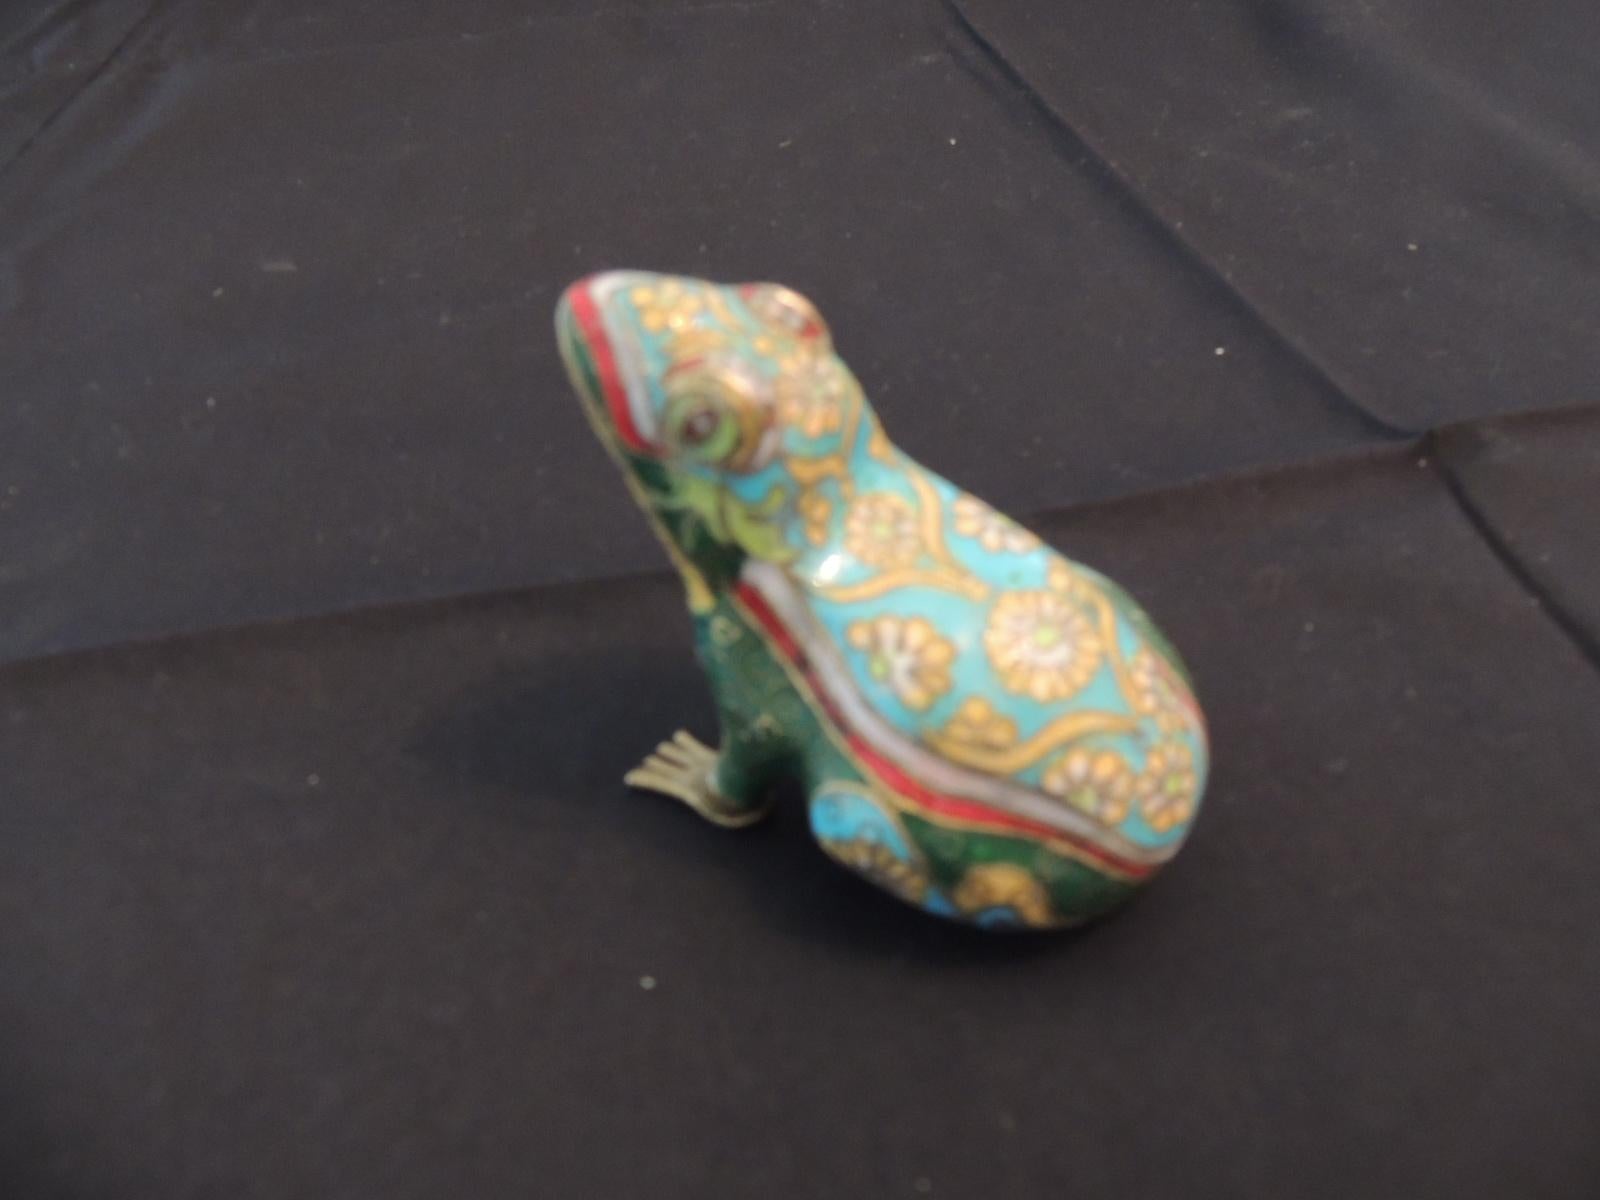 Vintage small cloisonne hand painted frog
Hand painted frog with flowers and leaves all-over and detailed brass feet.
In shades of yellow, orange, aqua, red, green, blue and pink.
Animalia: Vintage cloisonne petite frog.
Size: 3.5” D x 2” W x